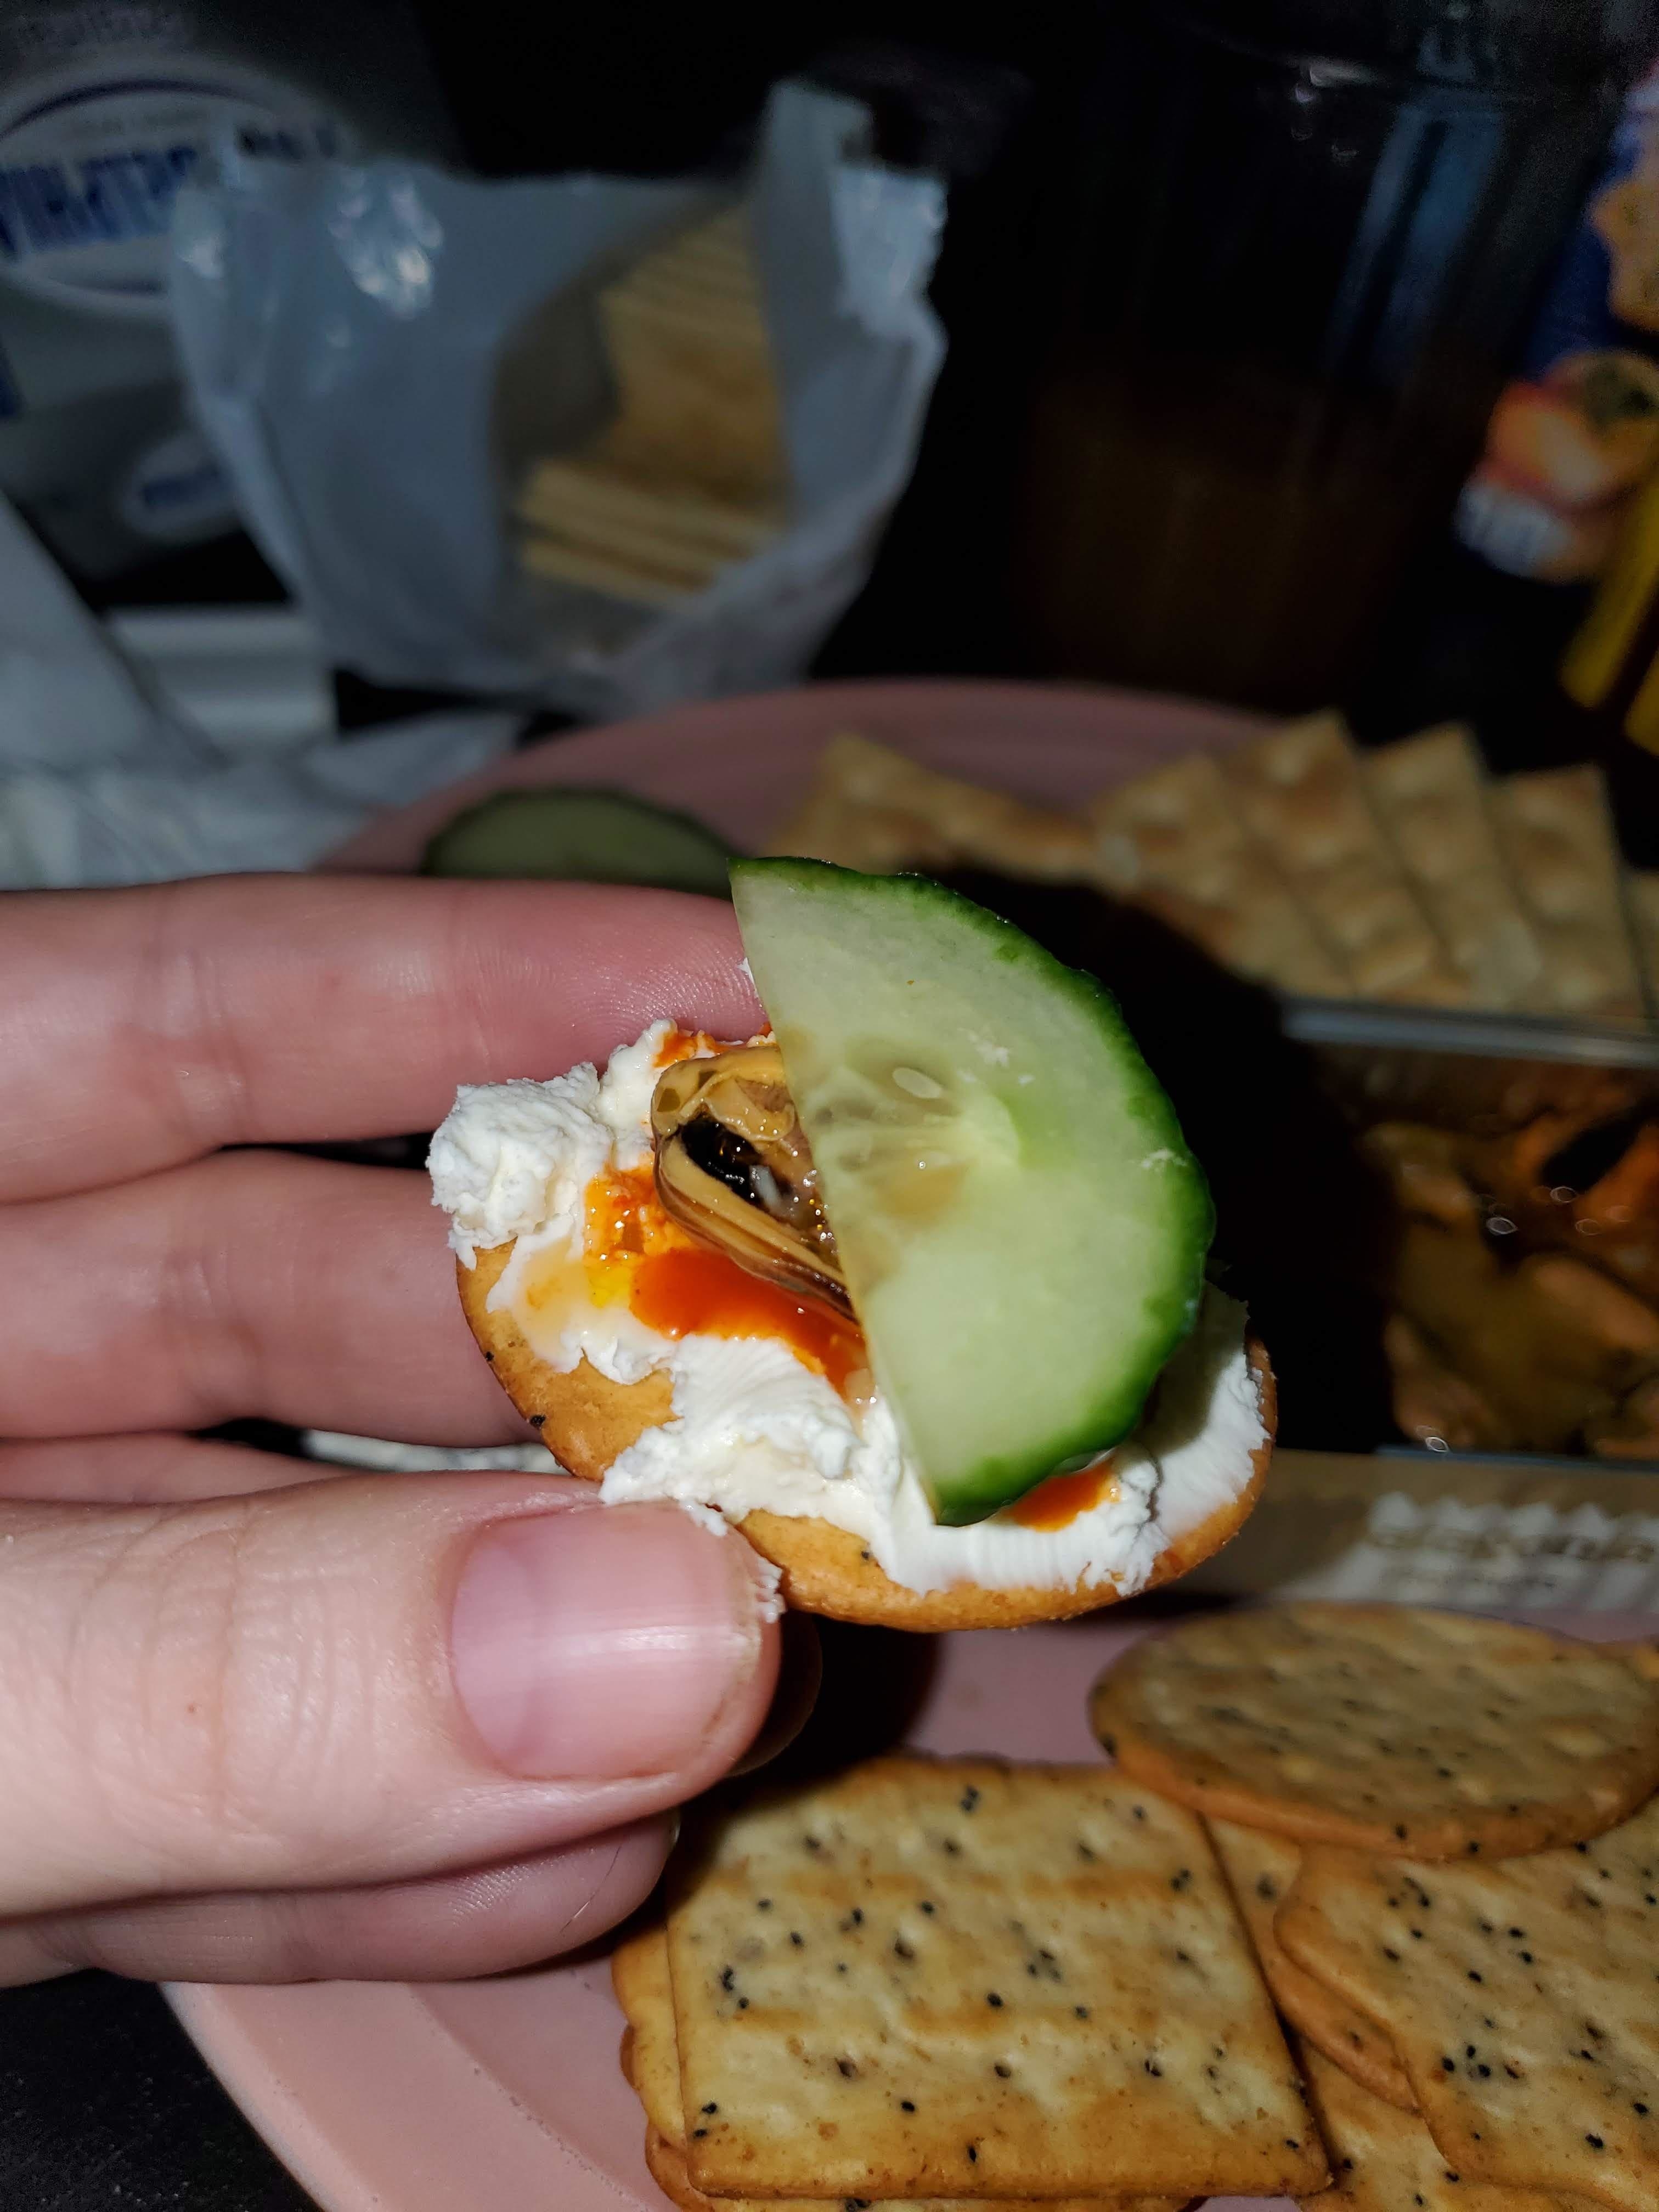 Hand holding cracker with cream cheese, a slice of cucumber, and a mussel, with more crackers in background